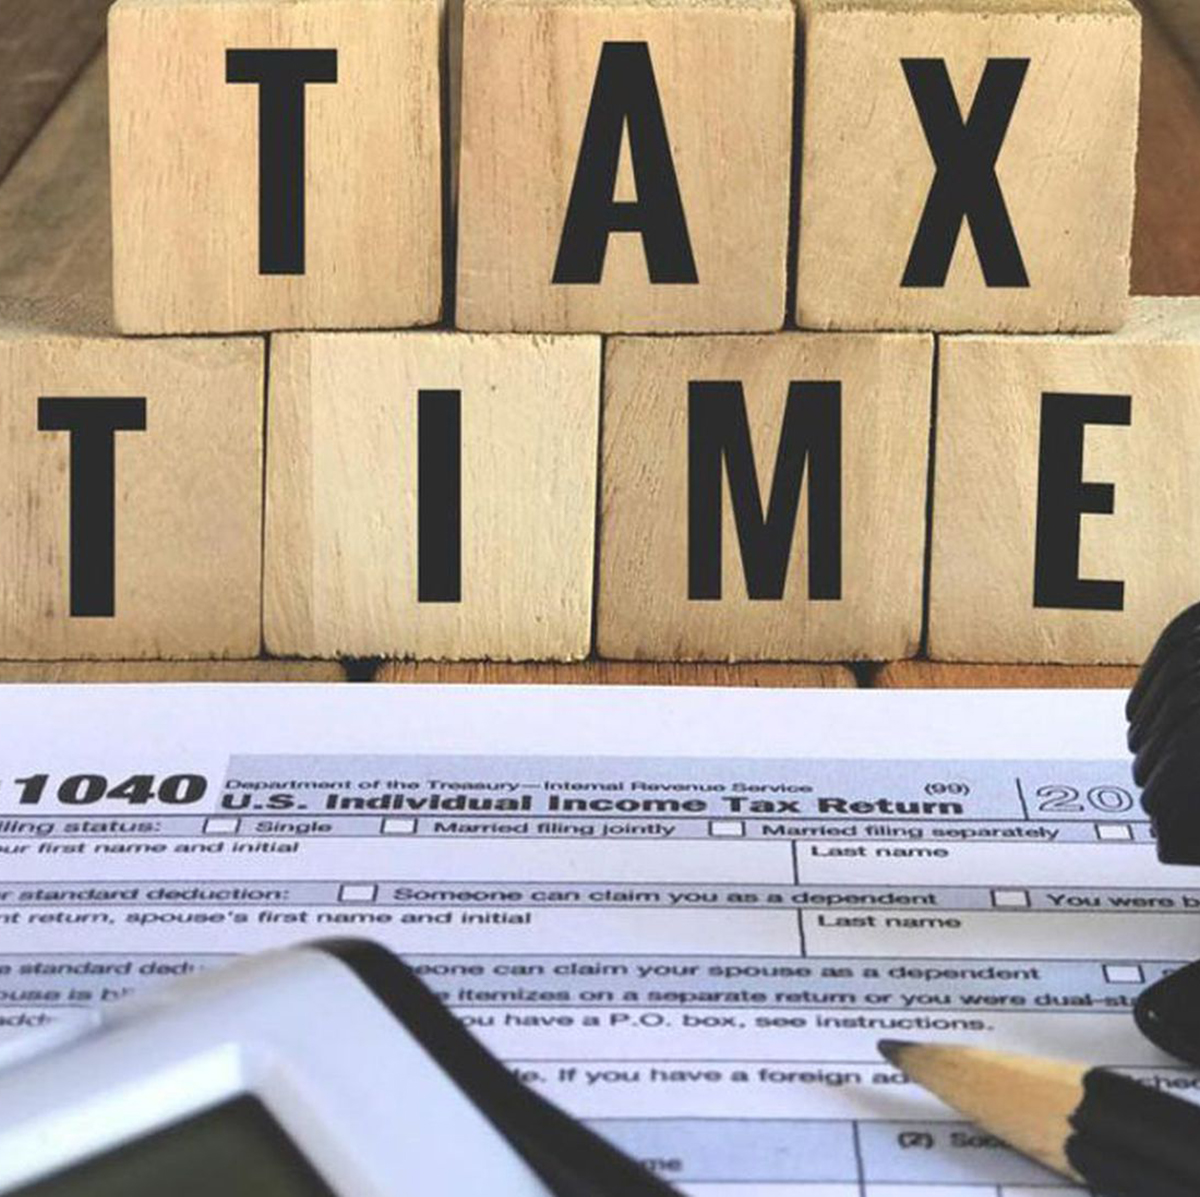 IRS: May 15 tax deadline extended to Oct. 16 for disaster area taxpayers in California, Alabama and Georgia